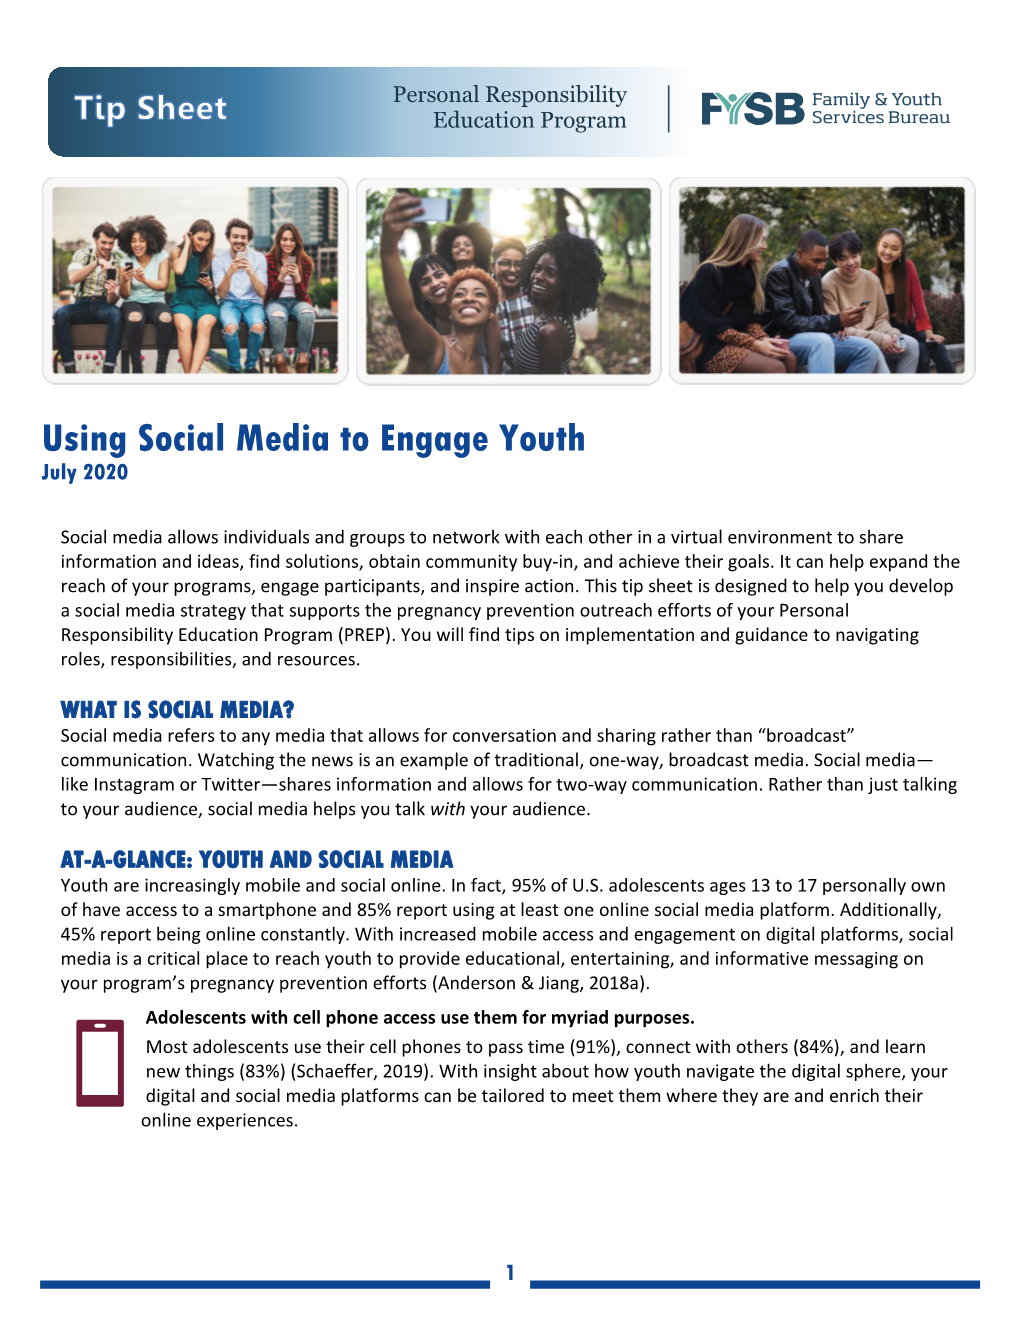 Using Social Media to Engage Youth Revised 7.1.20 to MEES